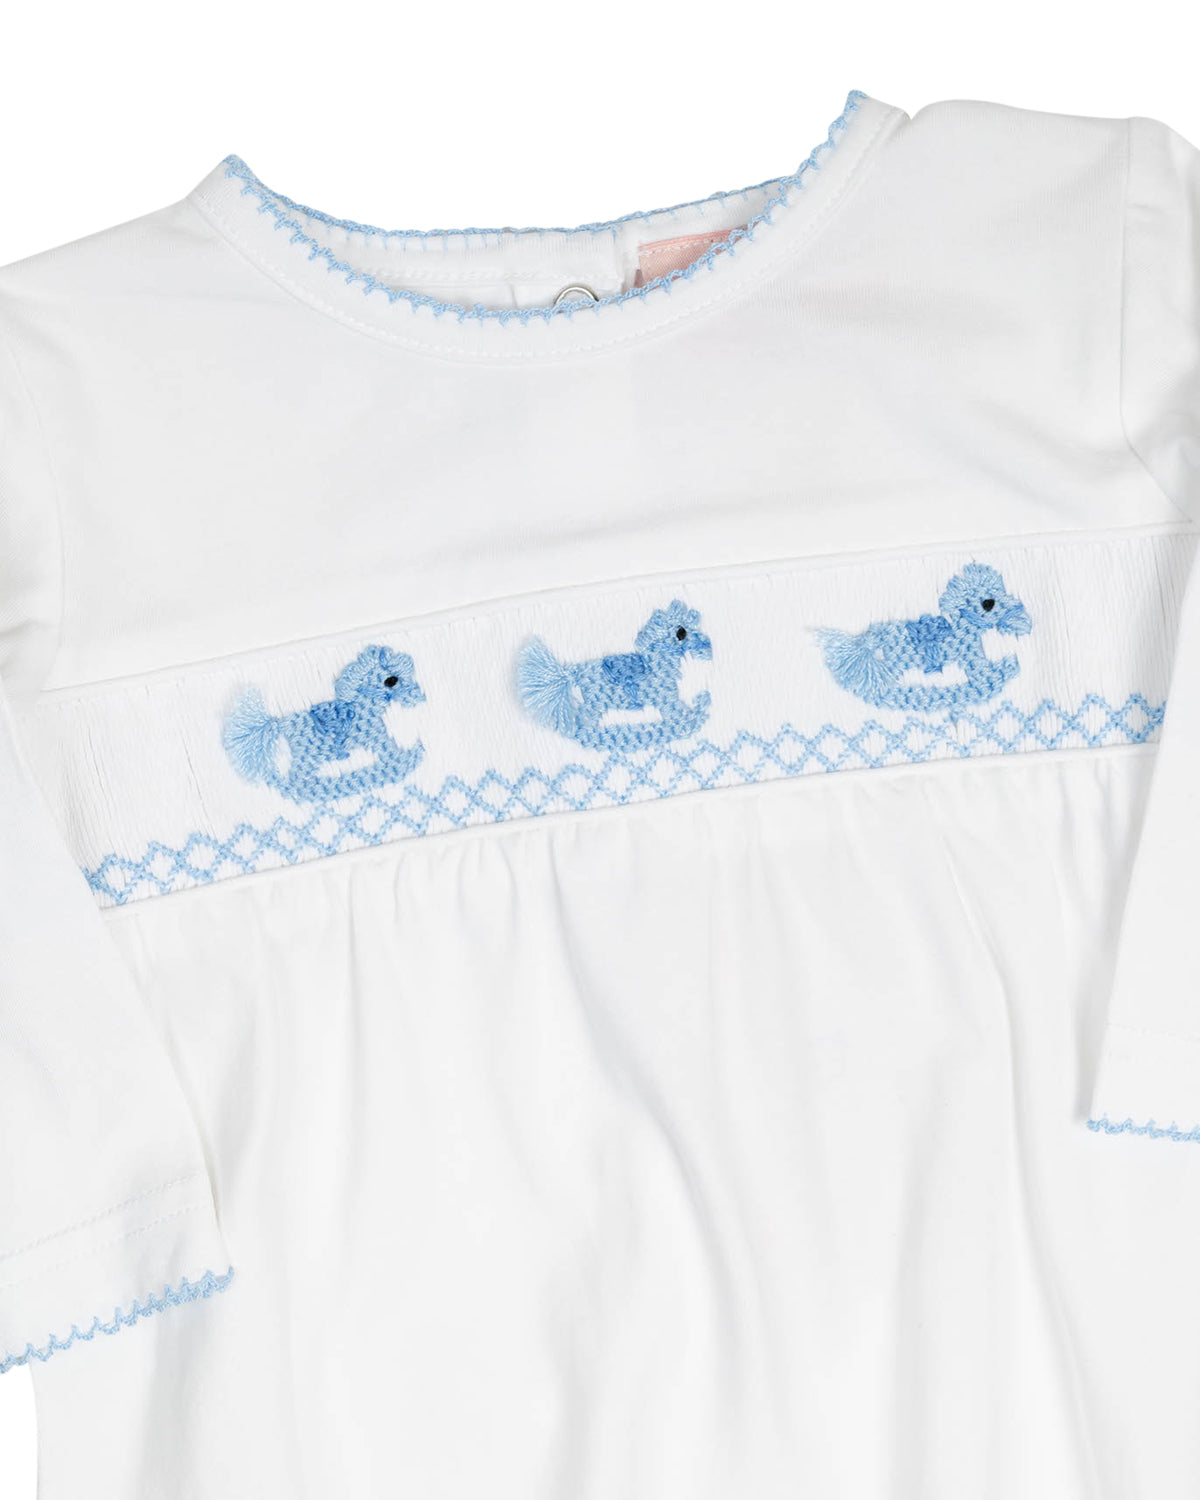 Rocking Horses Smocked Knit Baby Gown